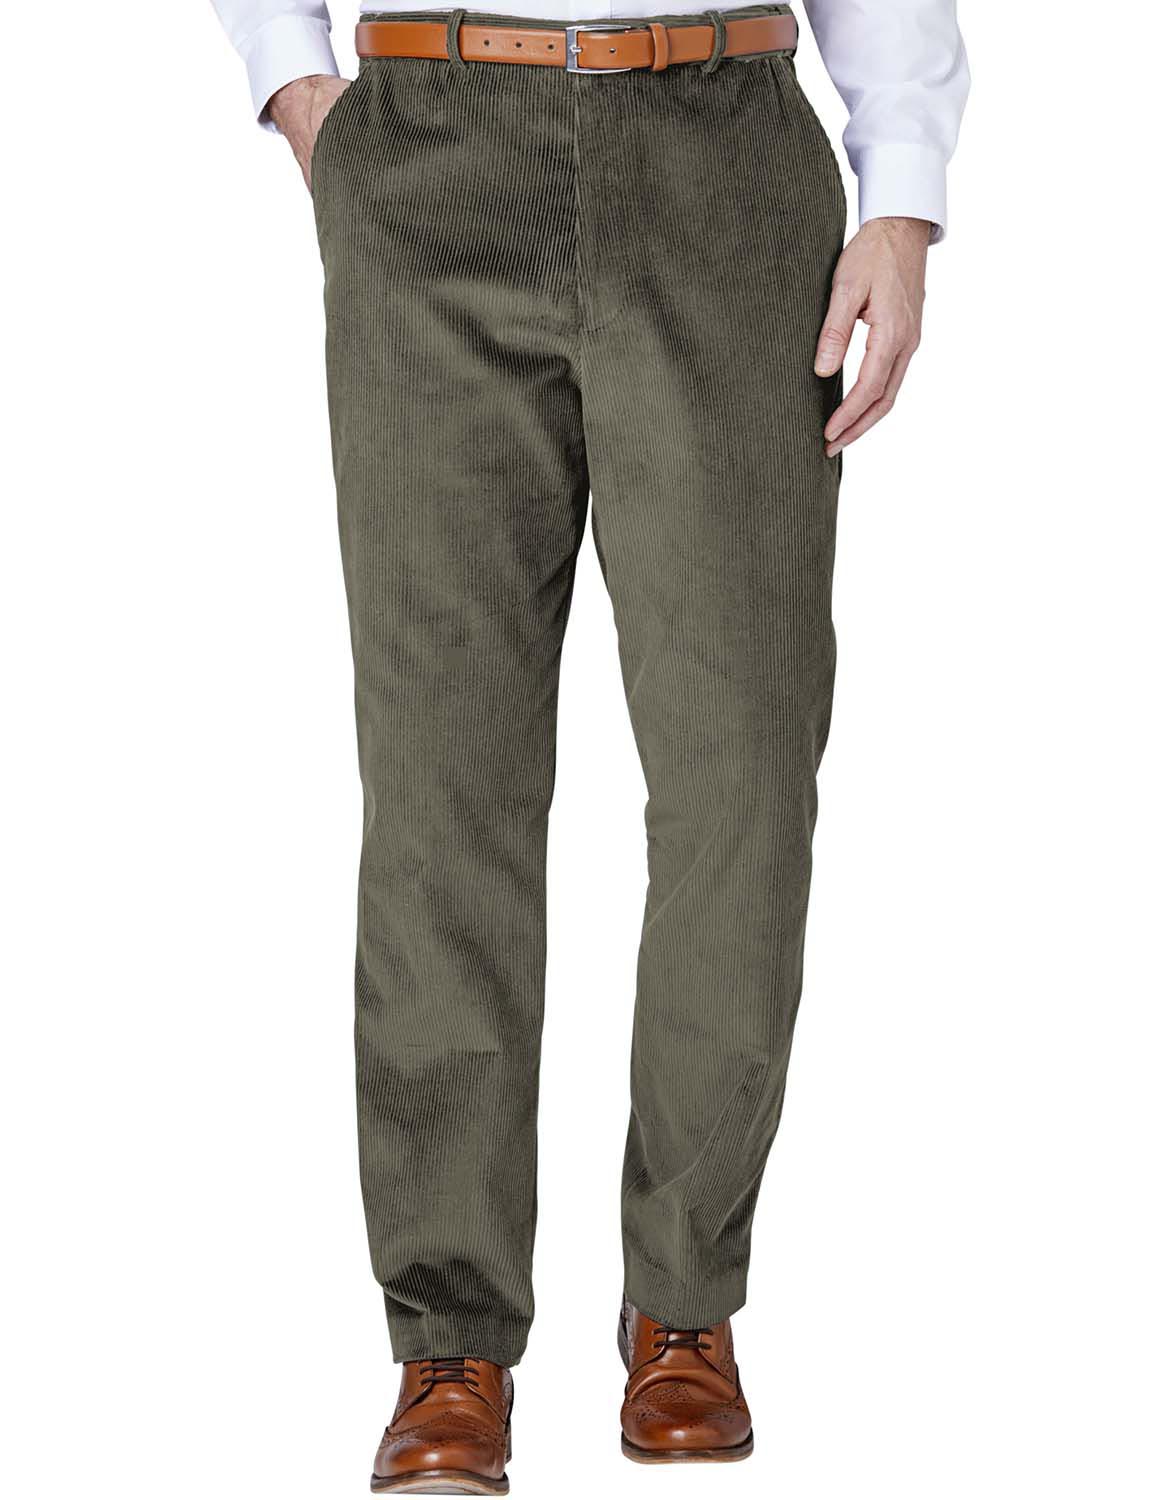 Mens Corduroy Cotton Trousers With Hidden Extra Waistband